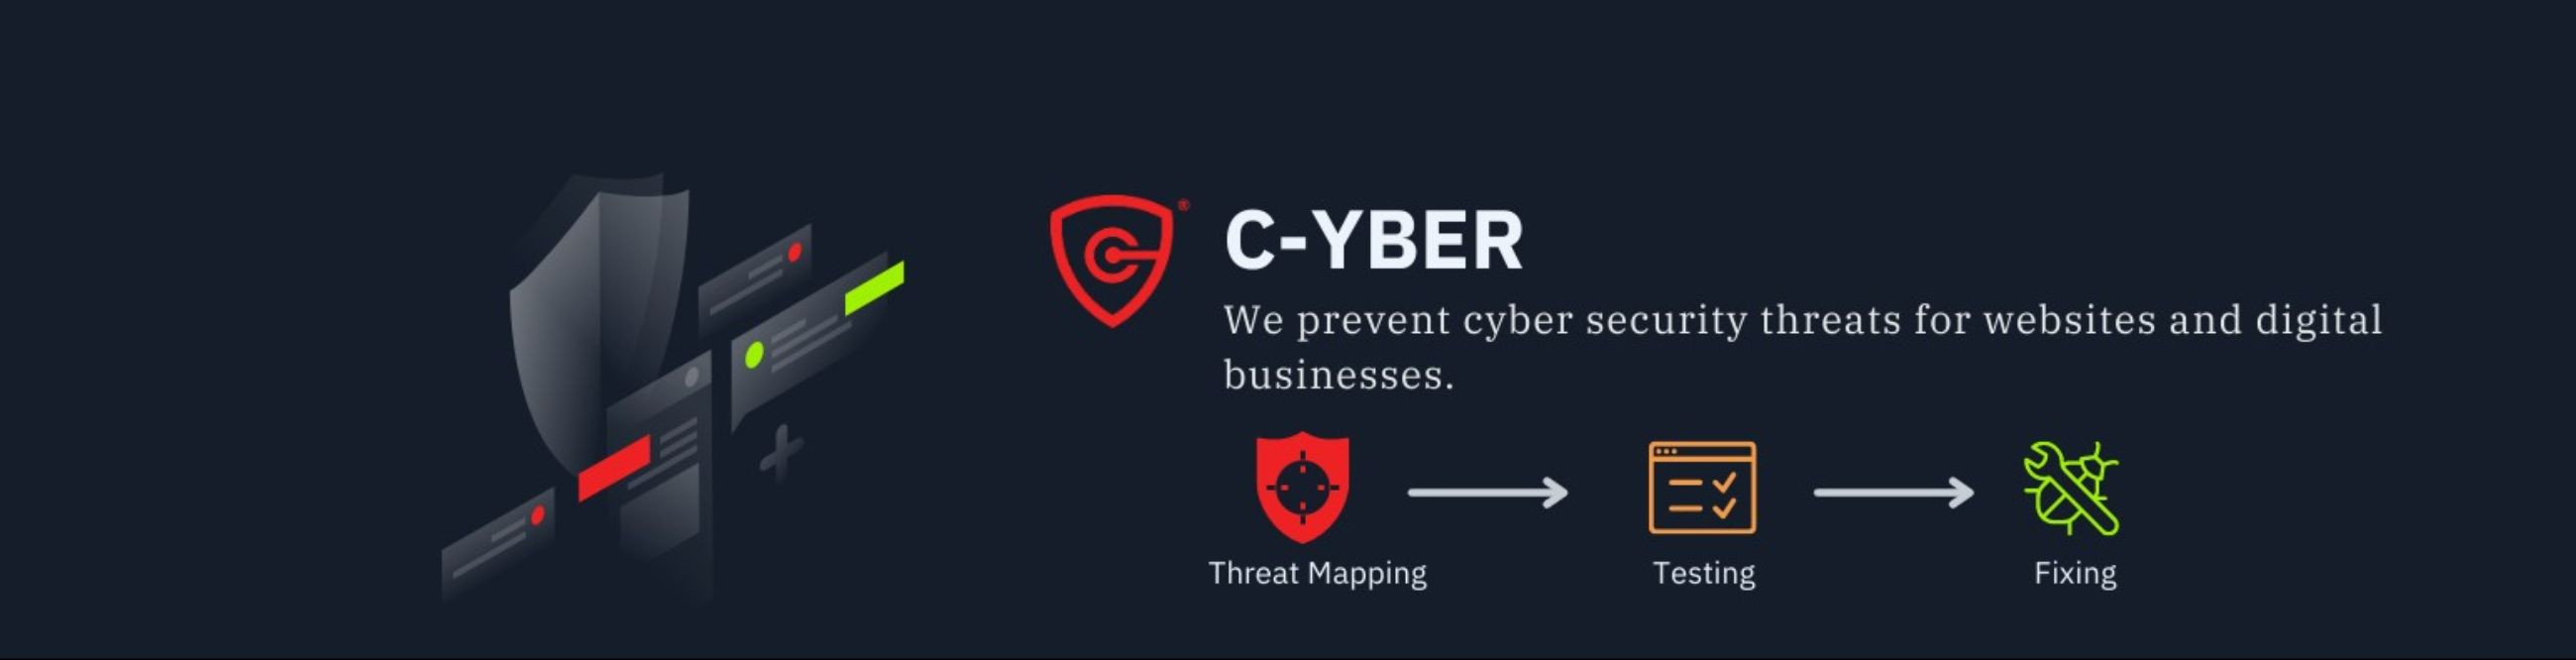 We are cybersecurity company specializing in online cyberattack prevention and works with developers to build secure online platforms